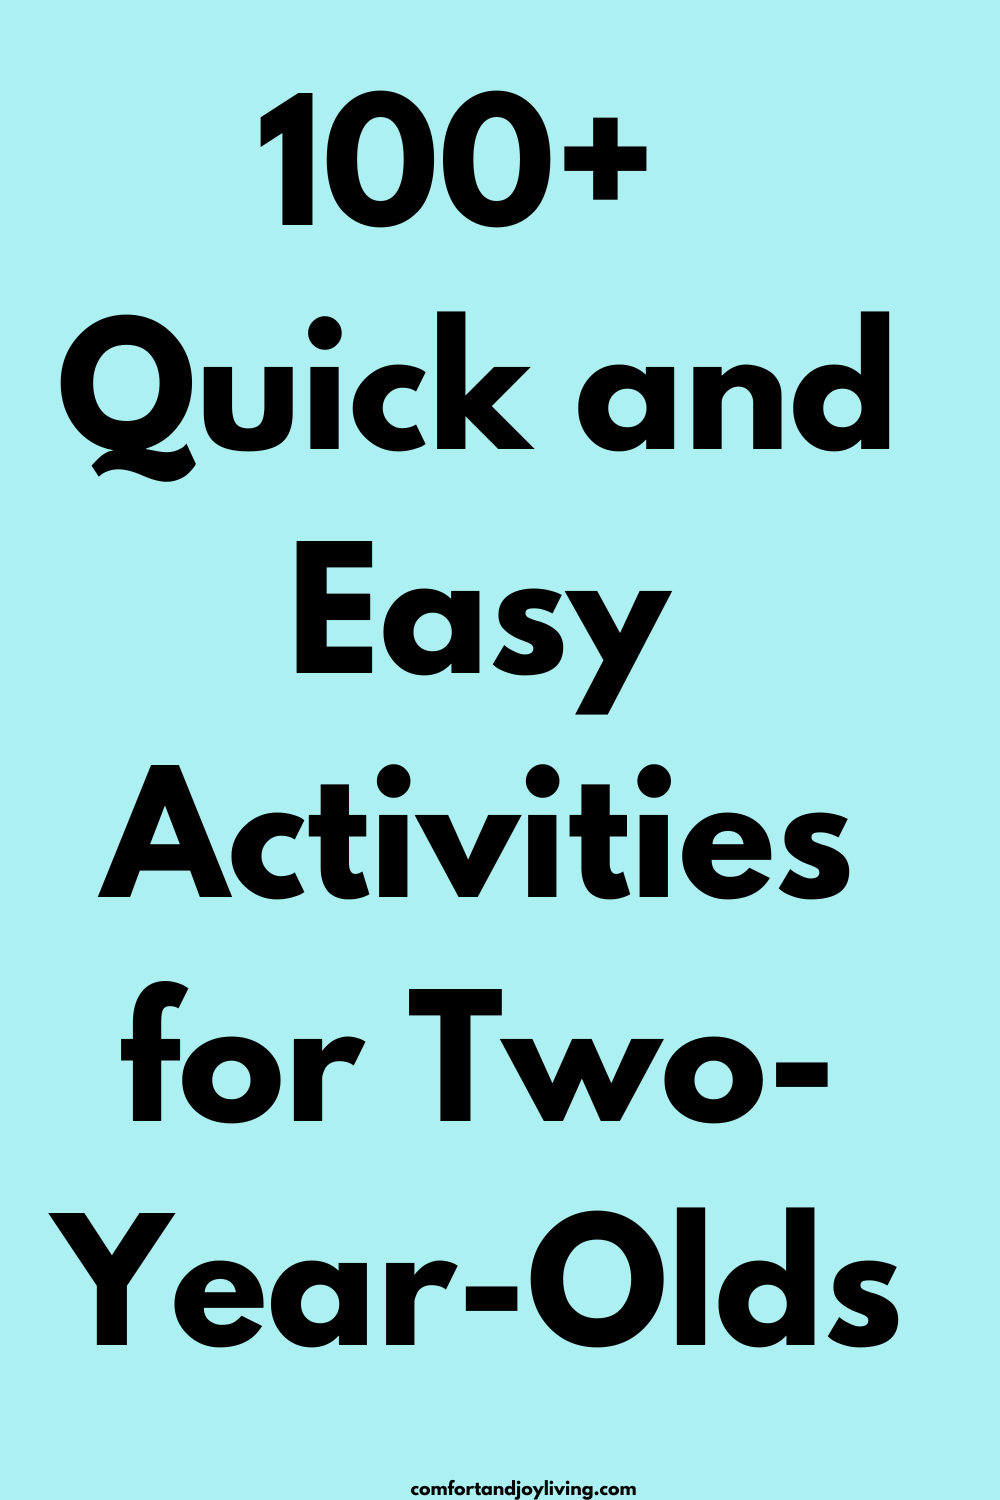 100+ Quick and Easy Activities for Two-Year-Olds